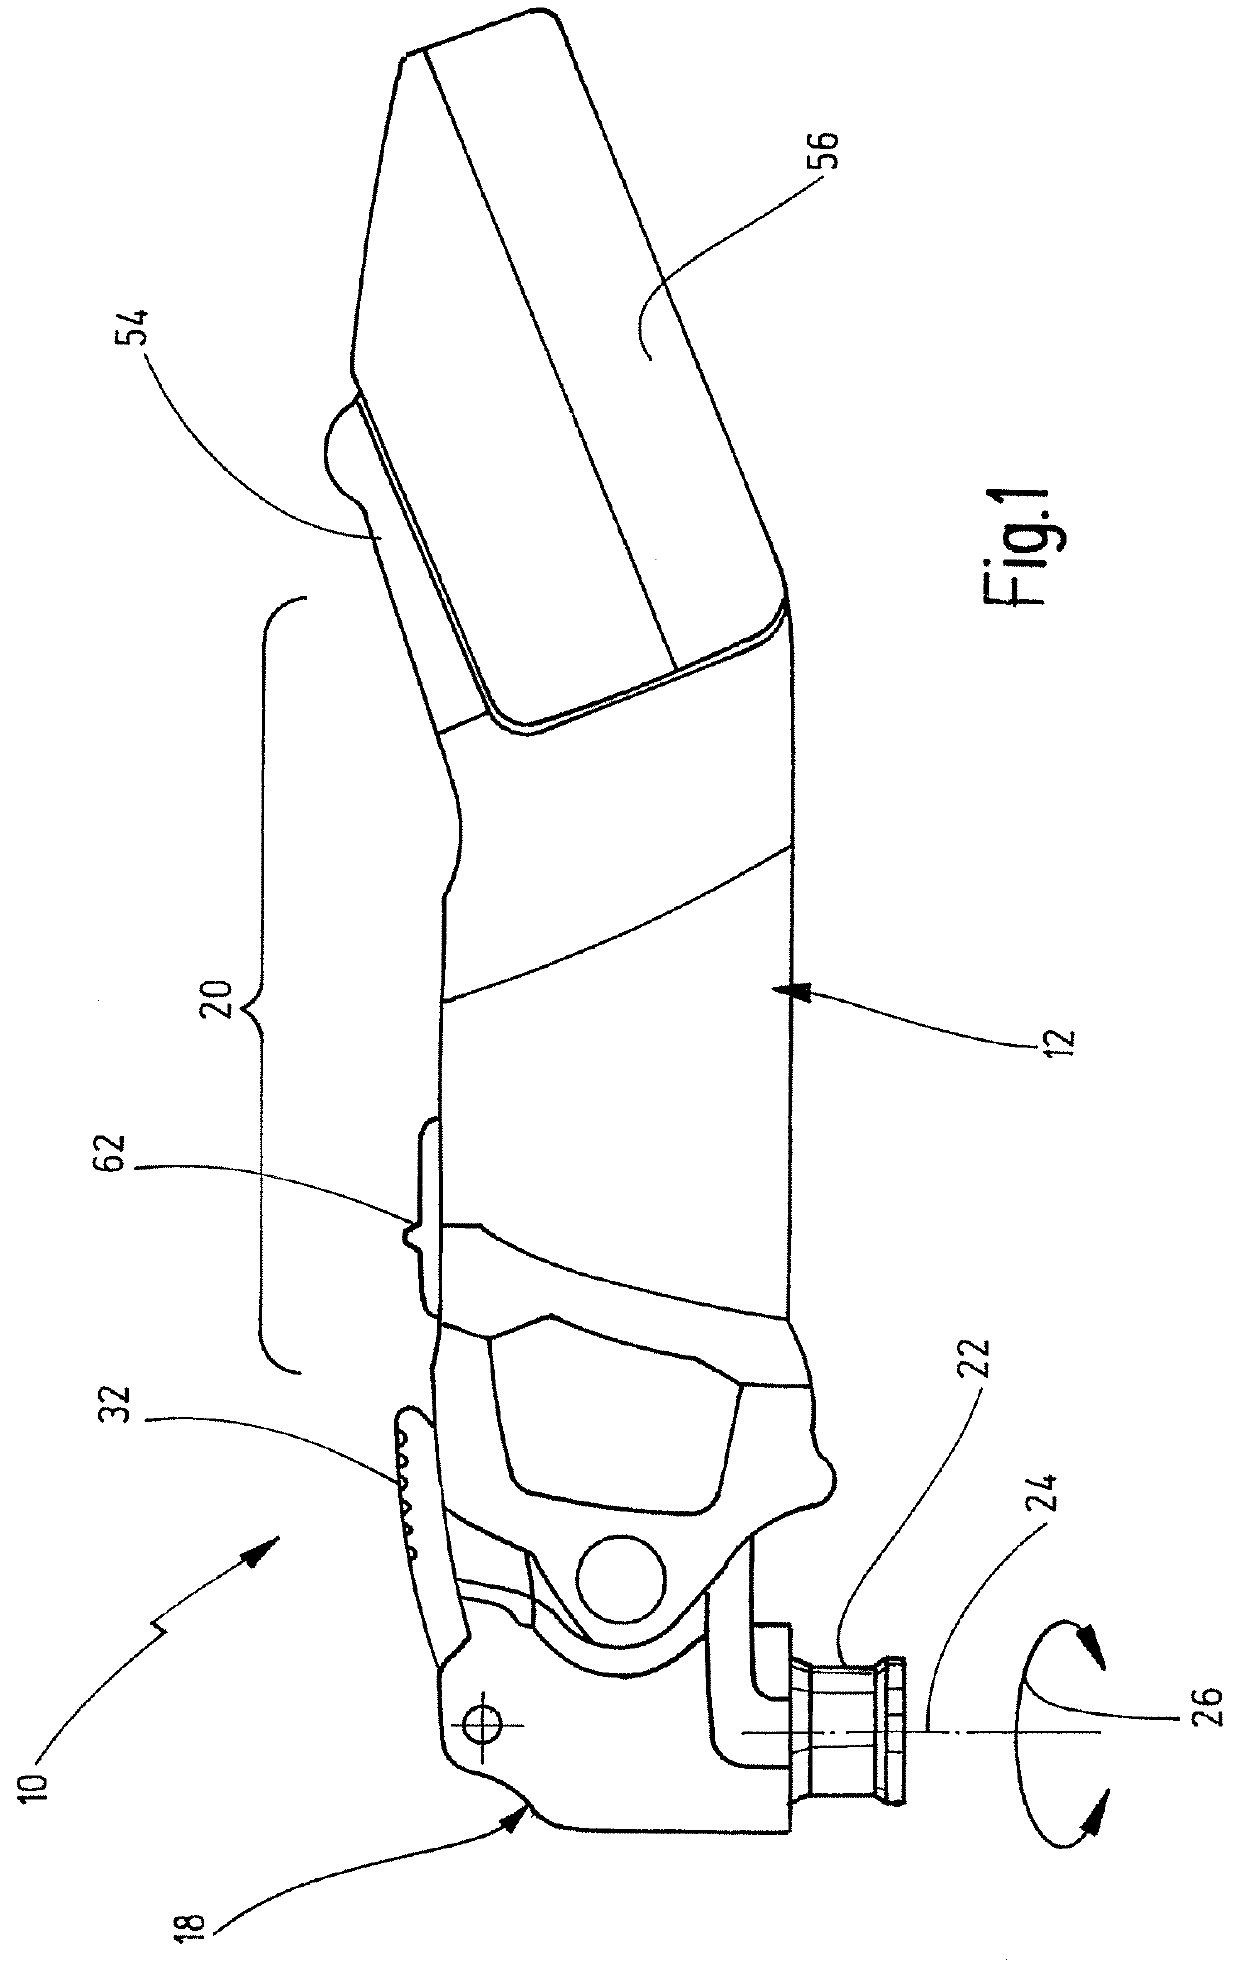 Hand tool comprising vibration damping elements